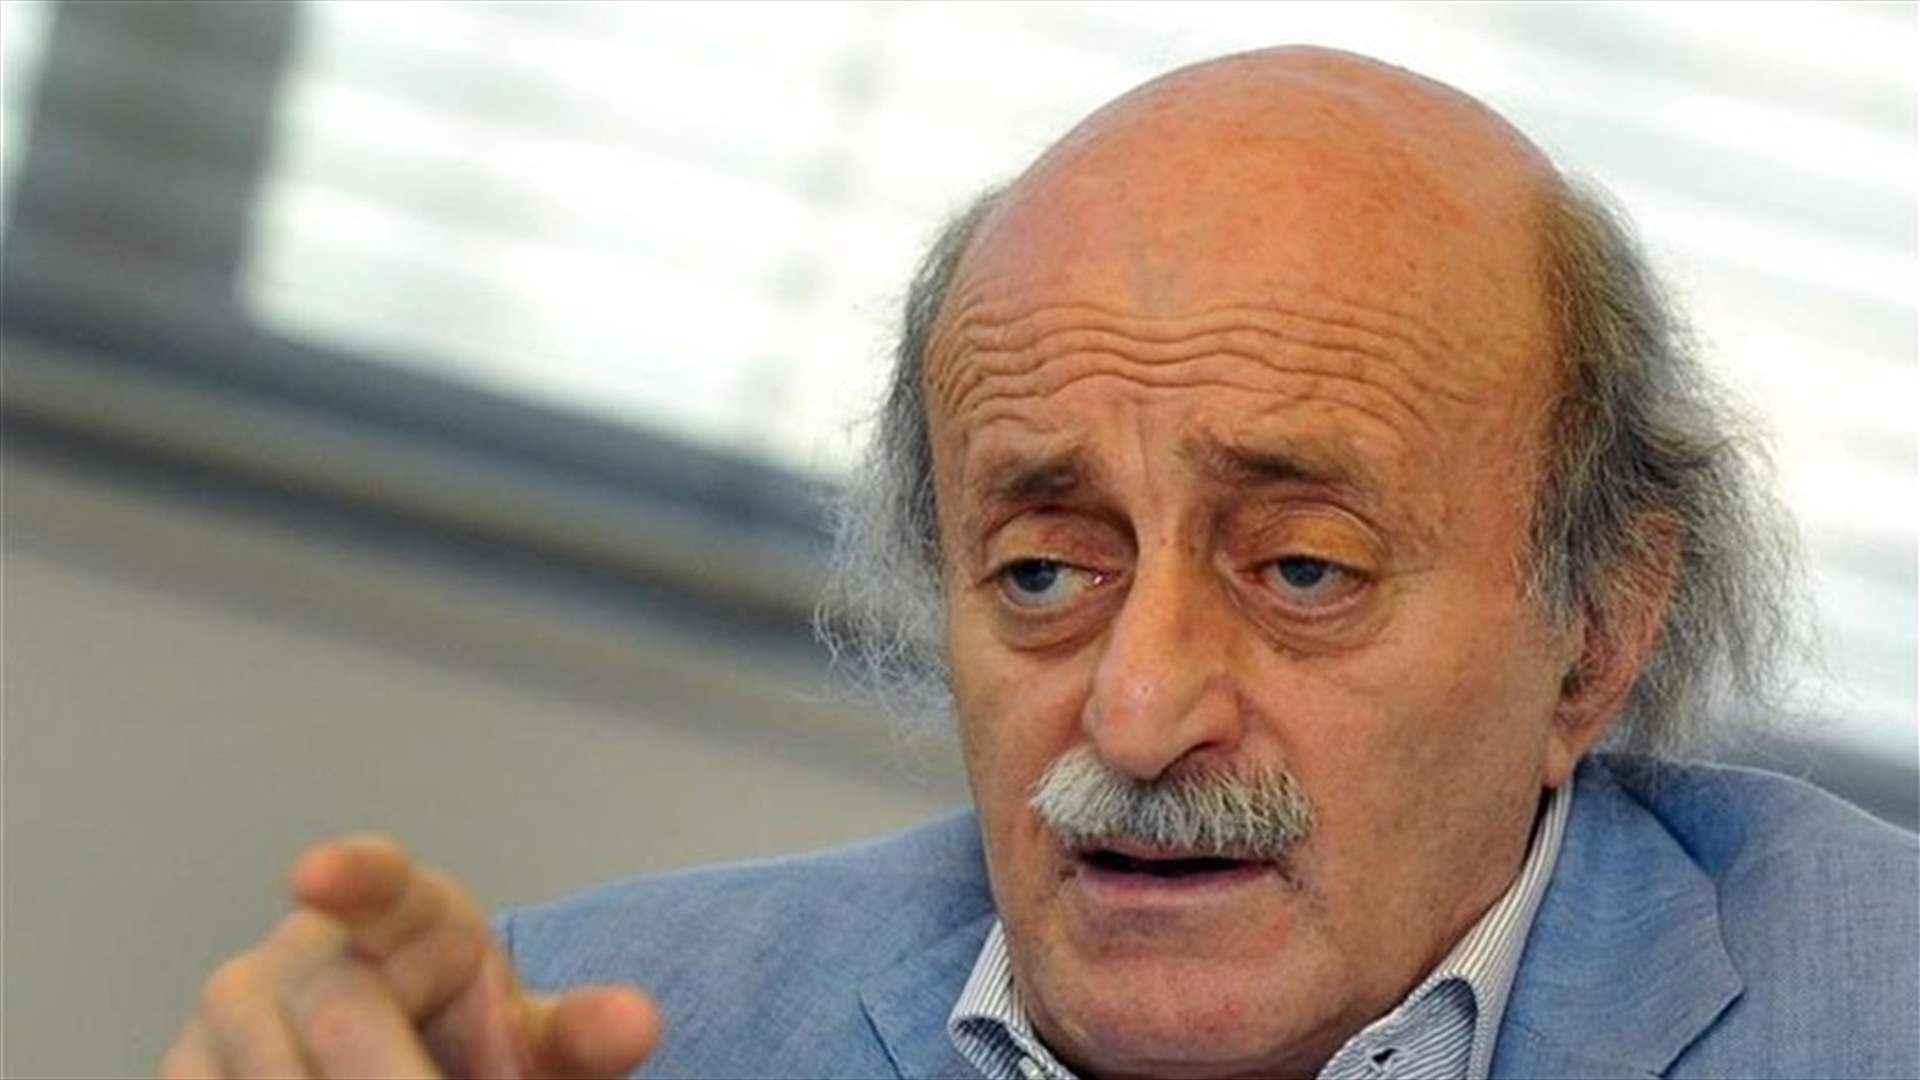 Jumblatt: If I get assaulted, I know in advance who is accused